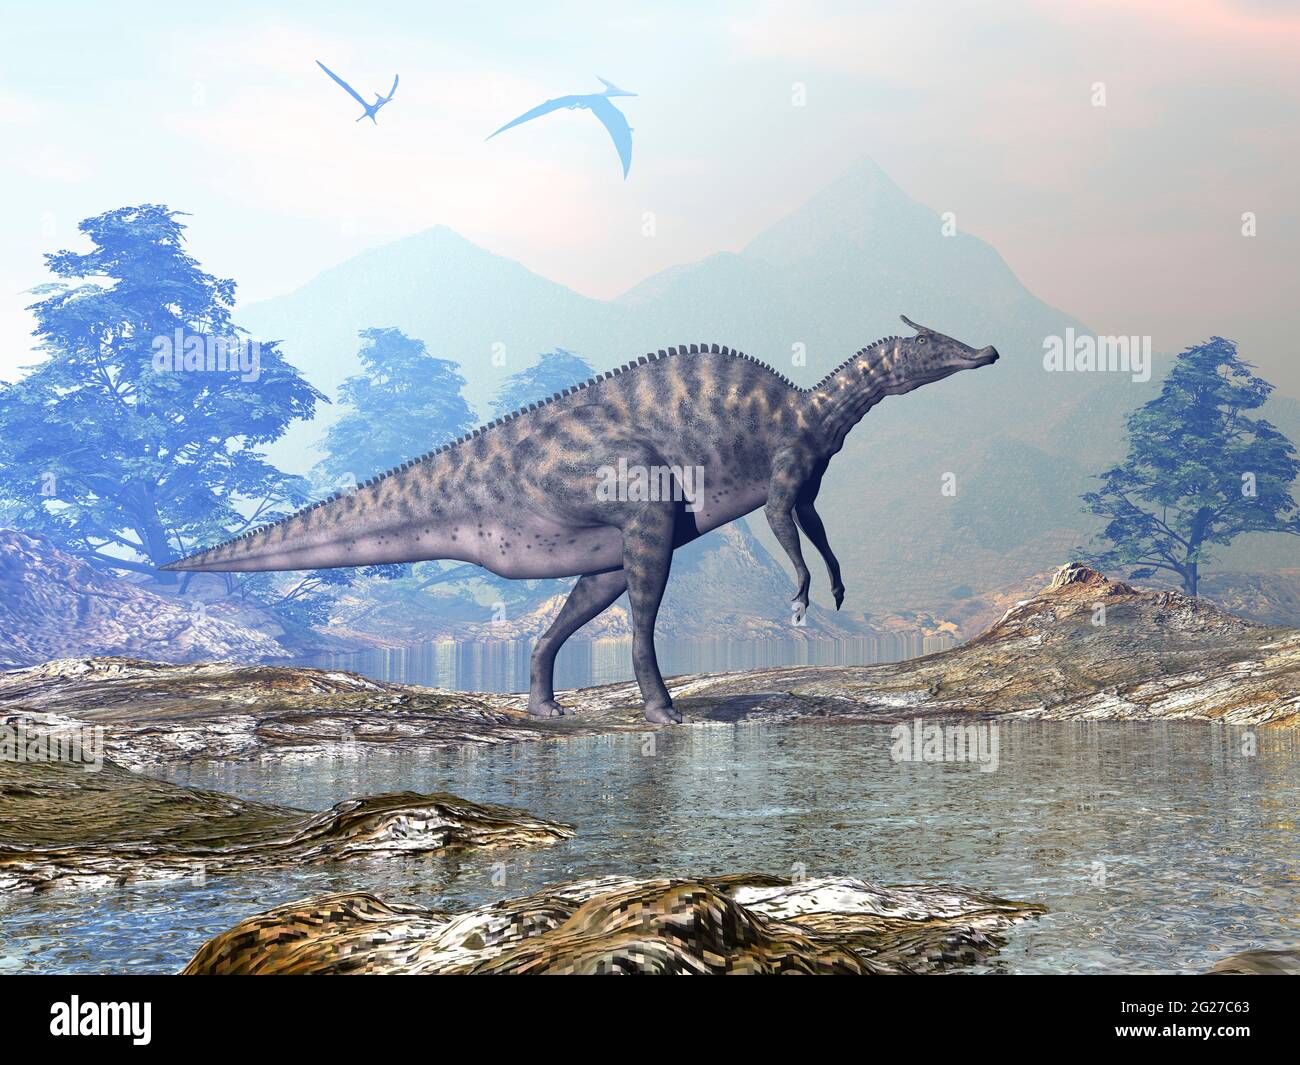 Saurolophus dinosaur walking in a beautiful landscape with mountains and water. Stock Photo